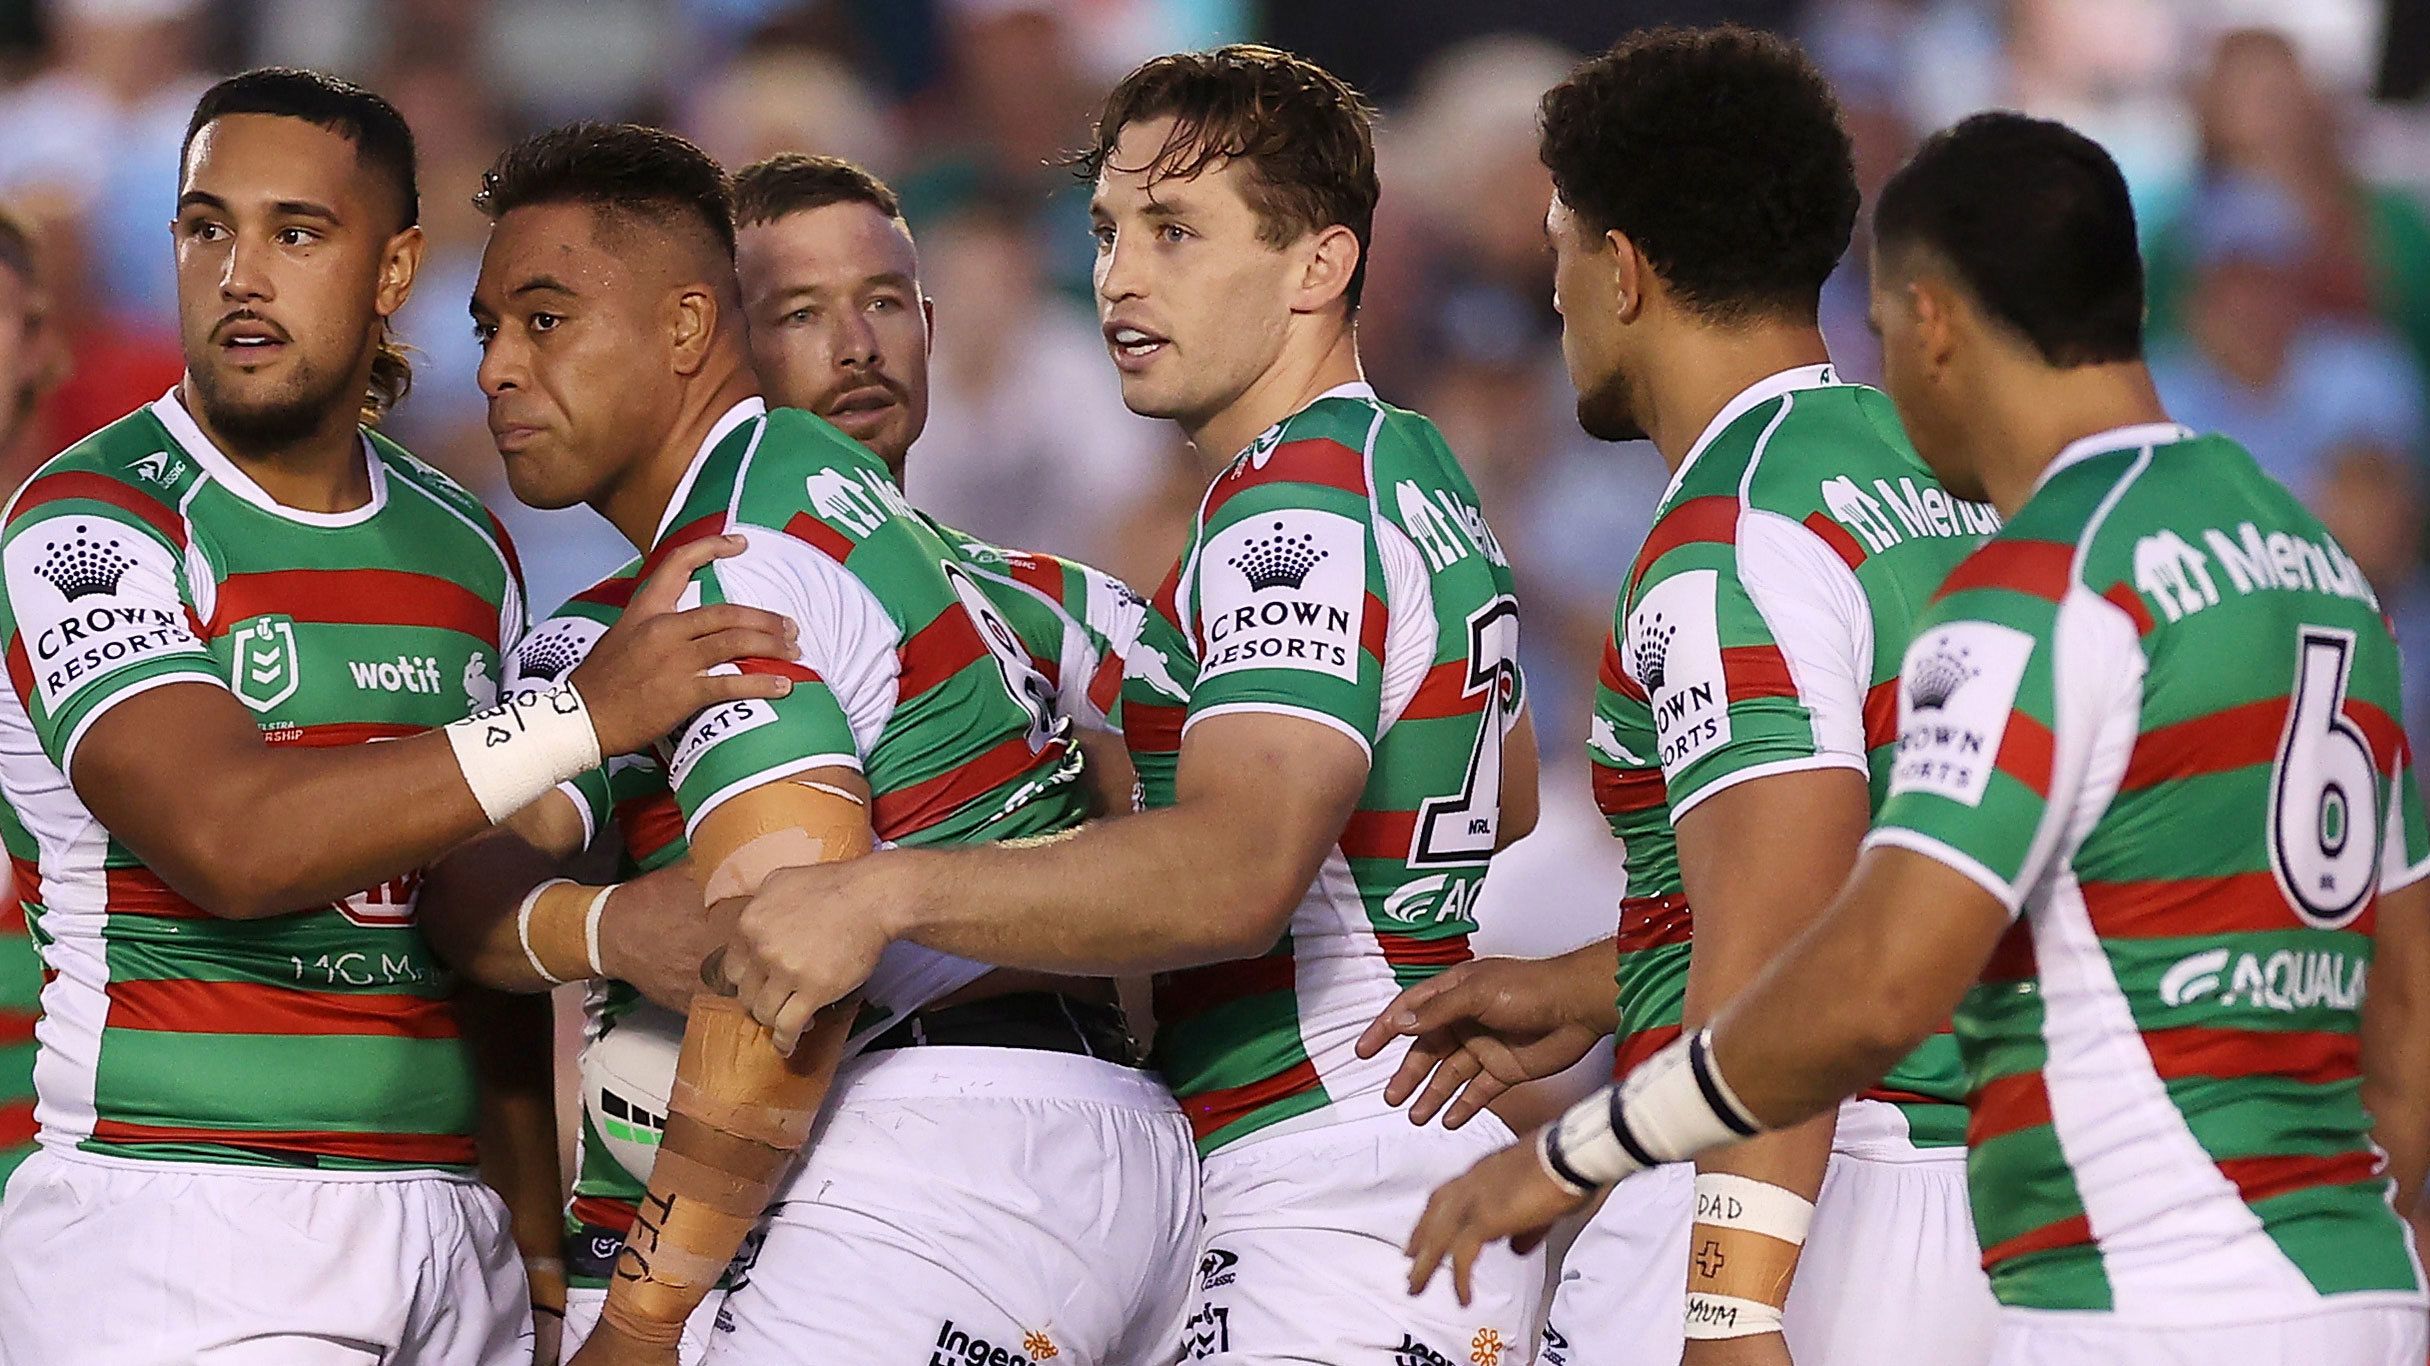 Tevita Tatola of the Rabbitohs is supported by his team after a head knock against the Sharks.